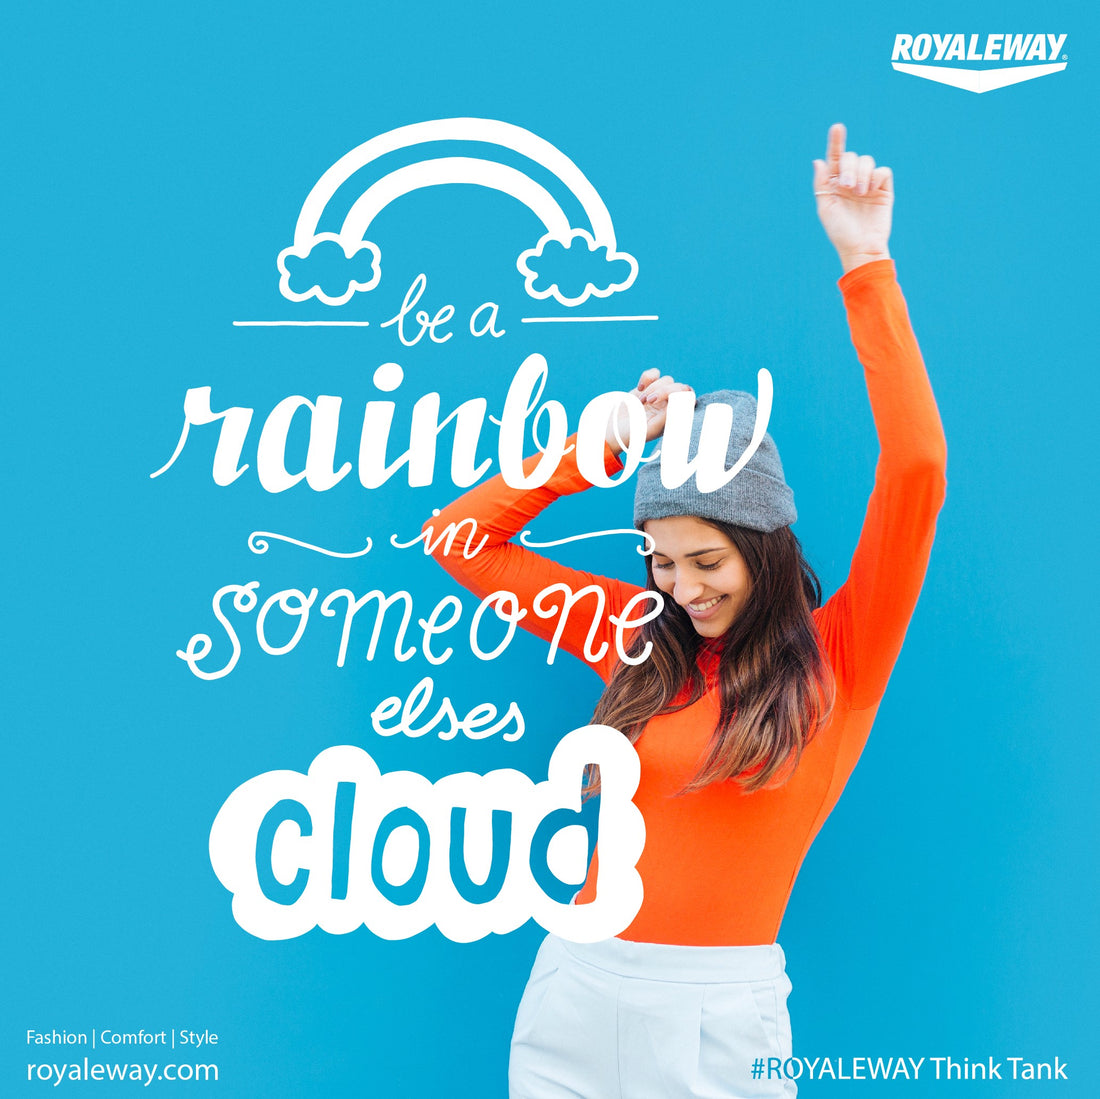 Be a Rainbow in Someone elses Cloud. ROYALEWAY Think Tank.